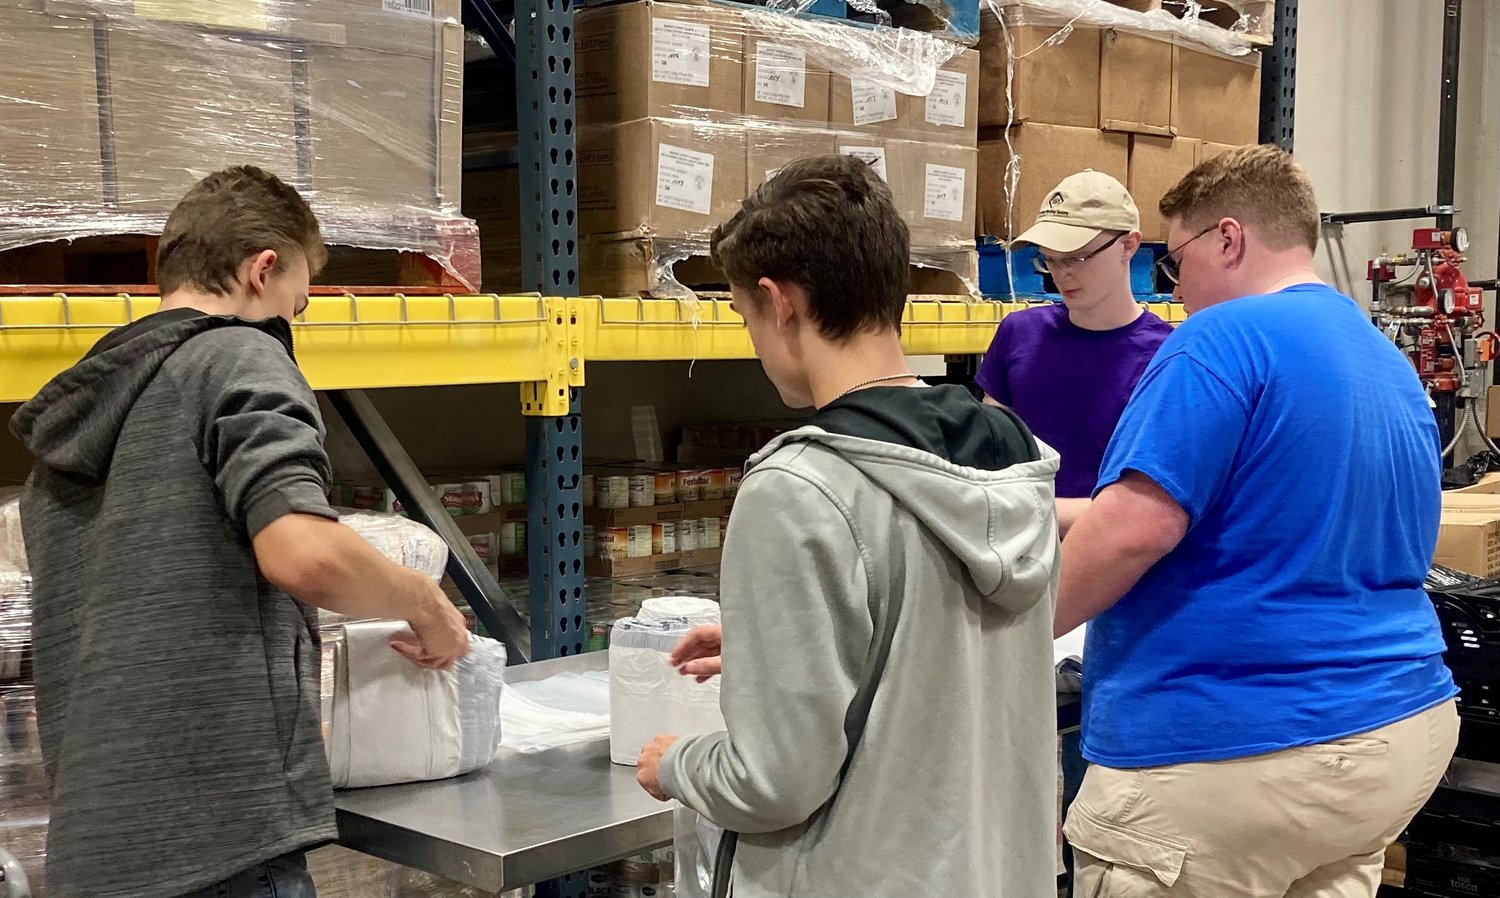 Students from Quincy University in Quincy, Illinois, help out in the food pantry during a service trip to the Catholic Charities Center in Jefferson City in October 2022.